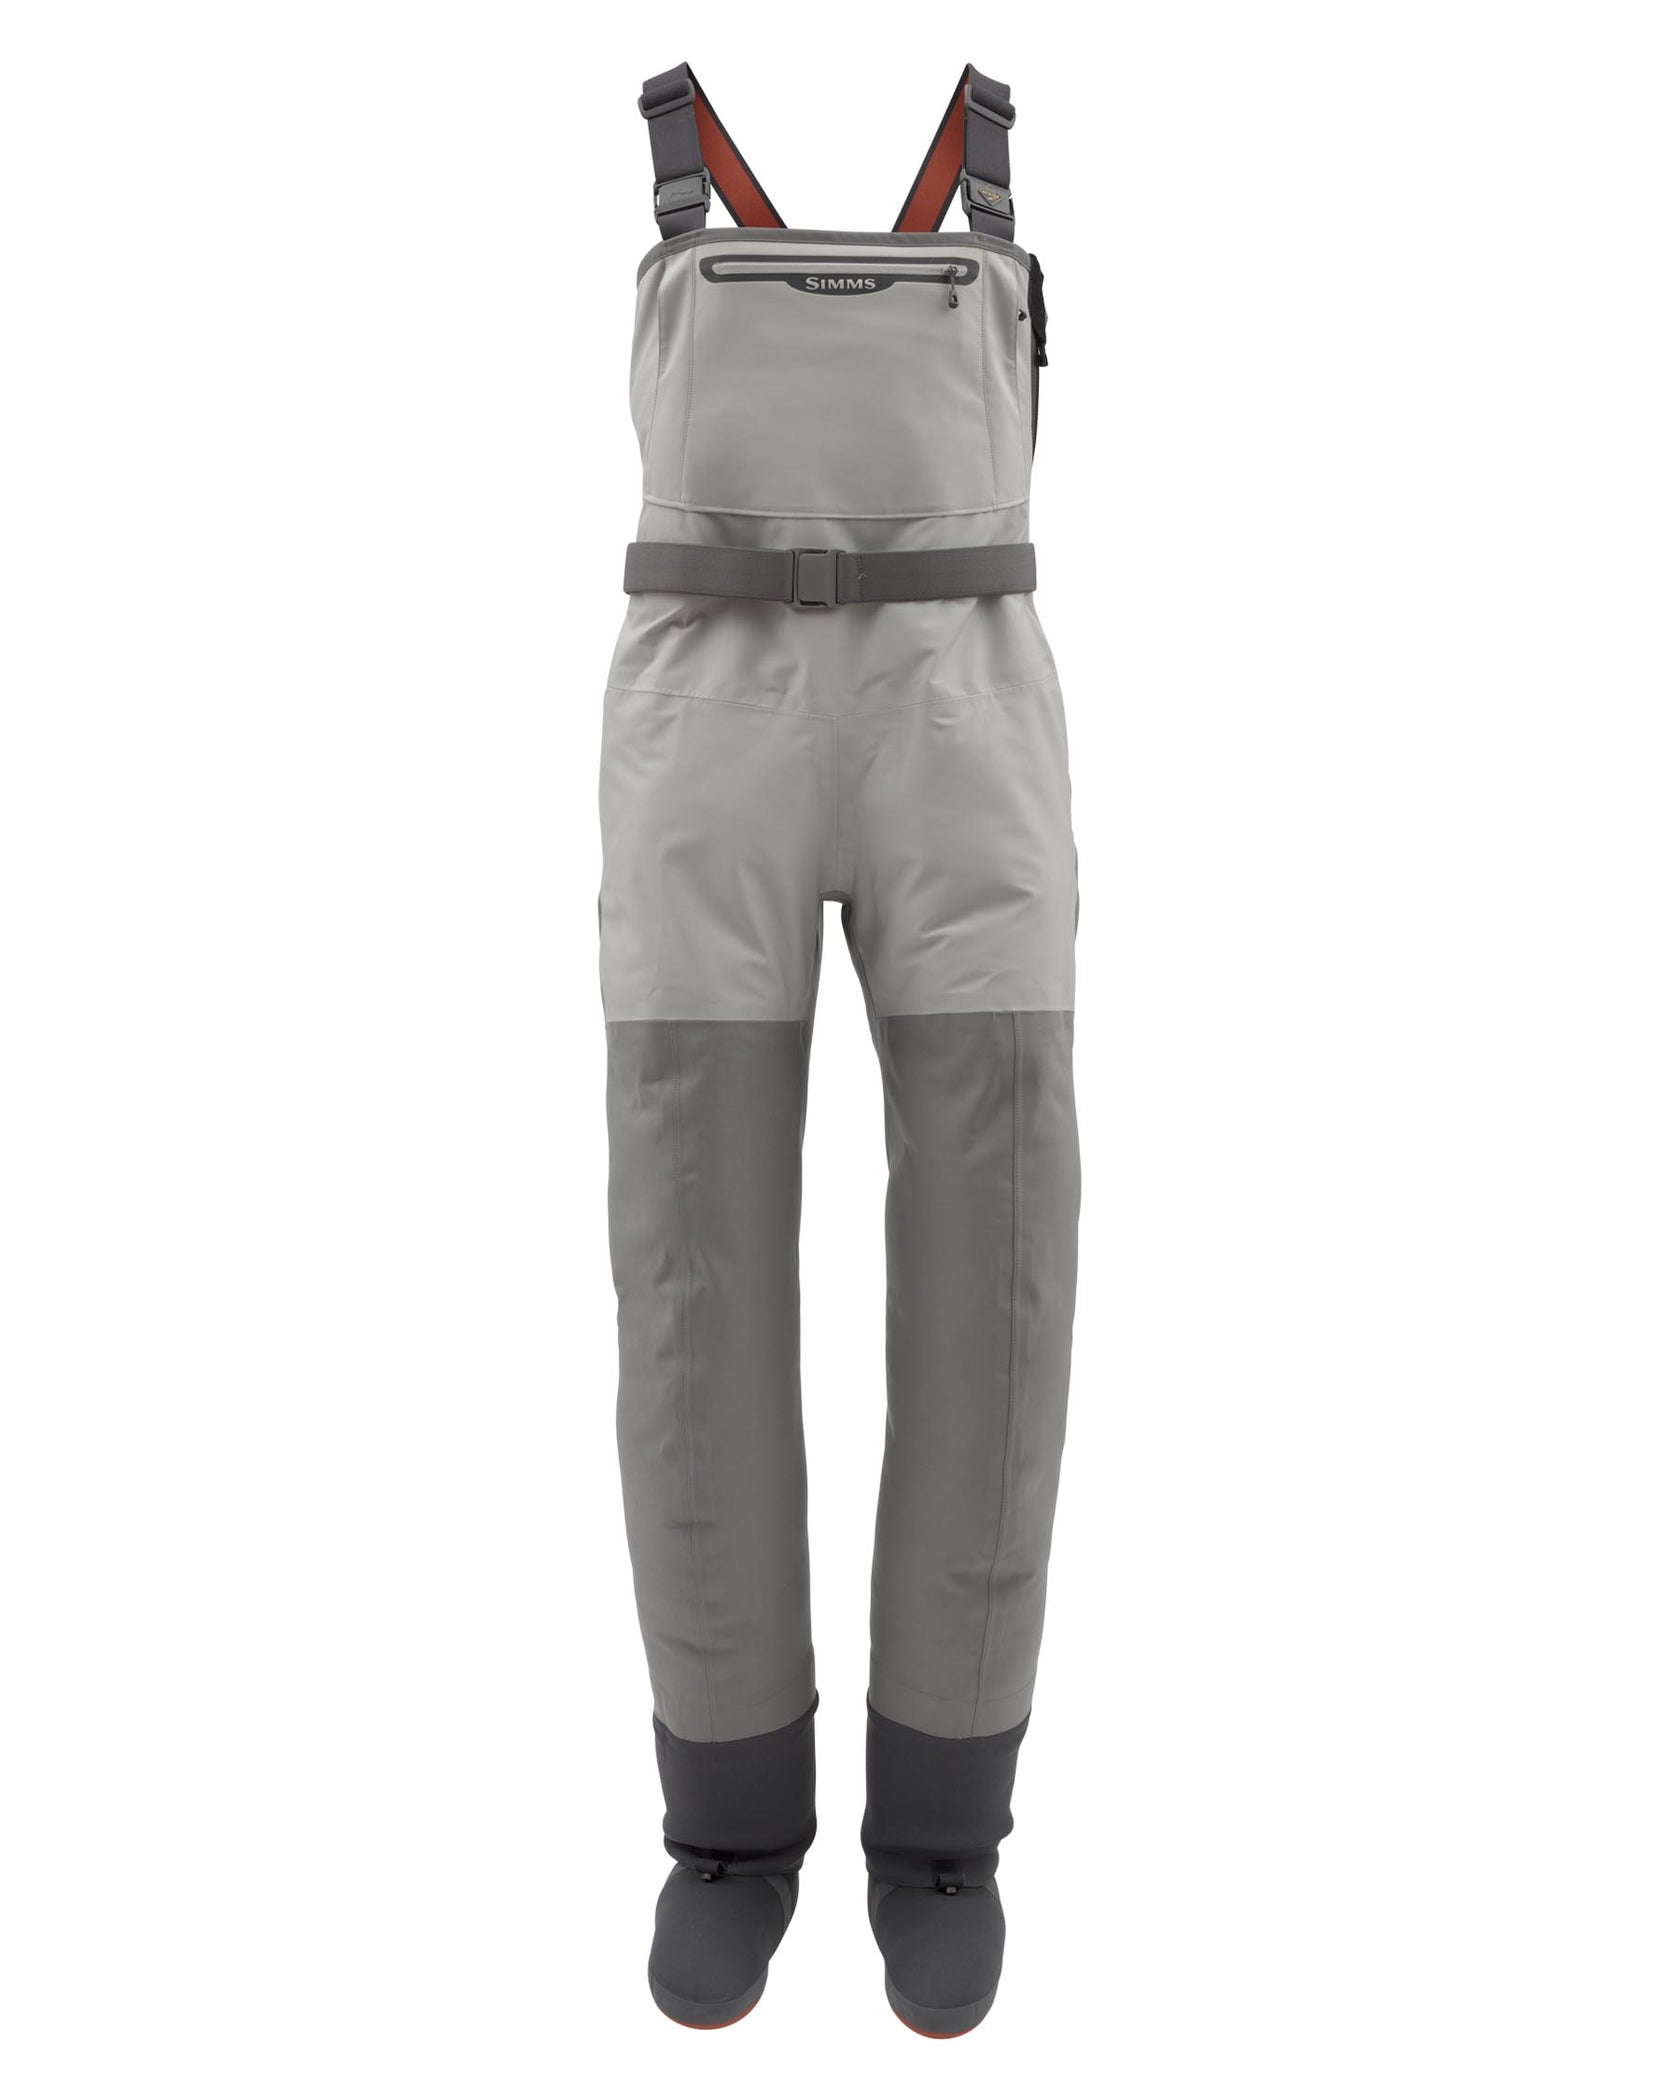 Women's G3 Guide Z Waders - Clearance